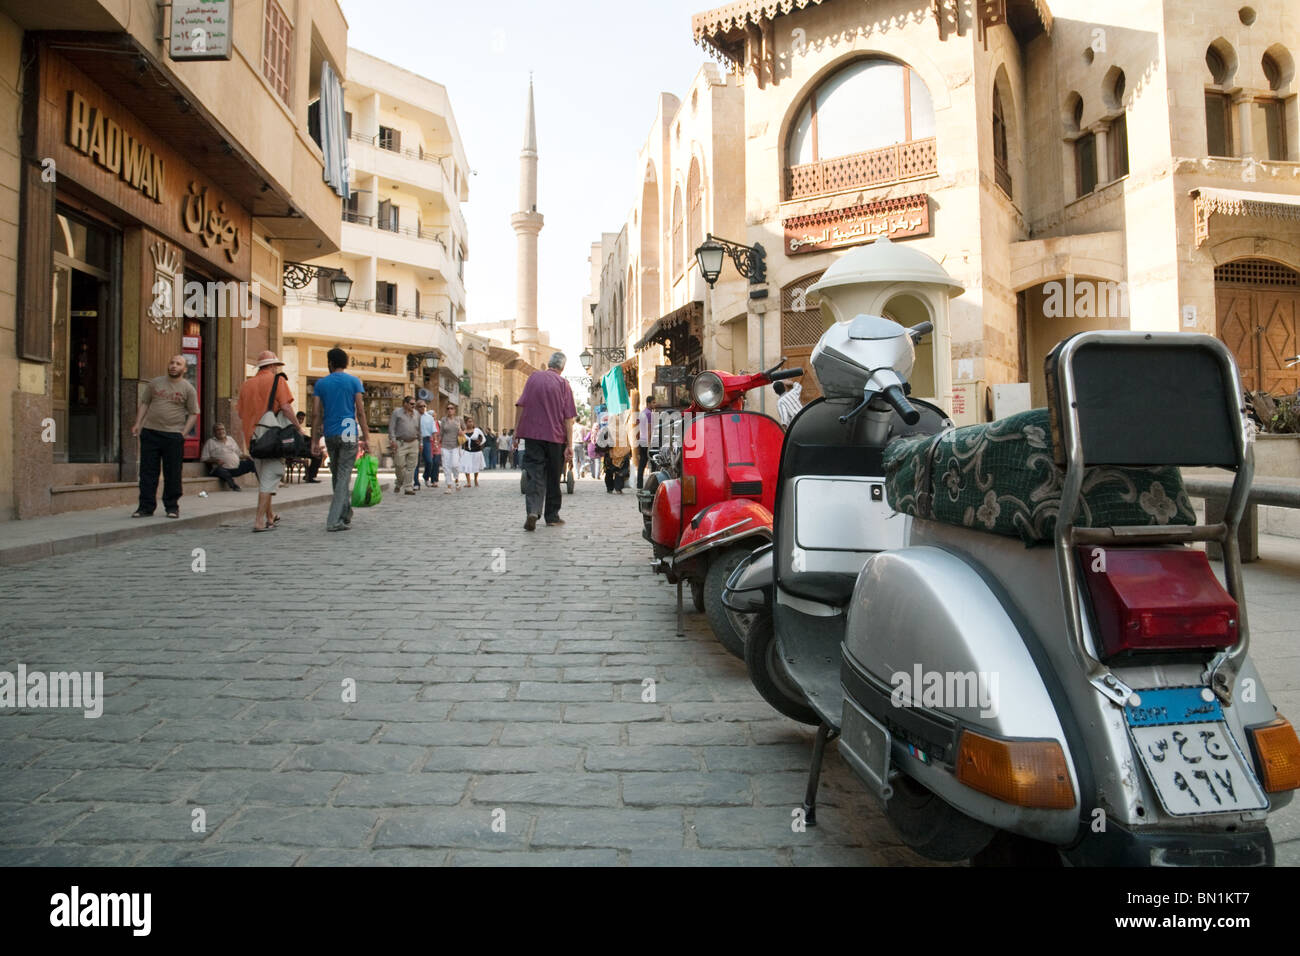 Egypt lifestyle; Street scene with scooter, in the Islamic quarter, Cairo Egypt north Africa Stock Photo